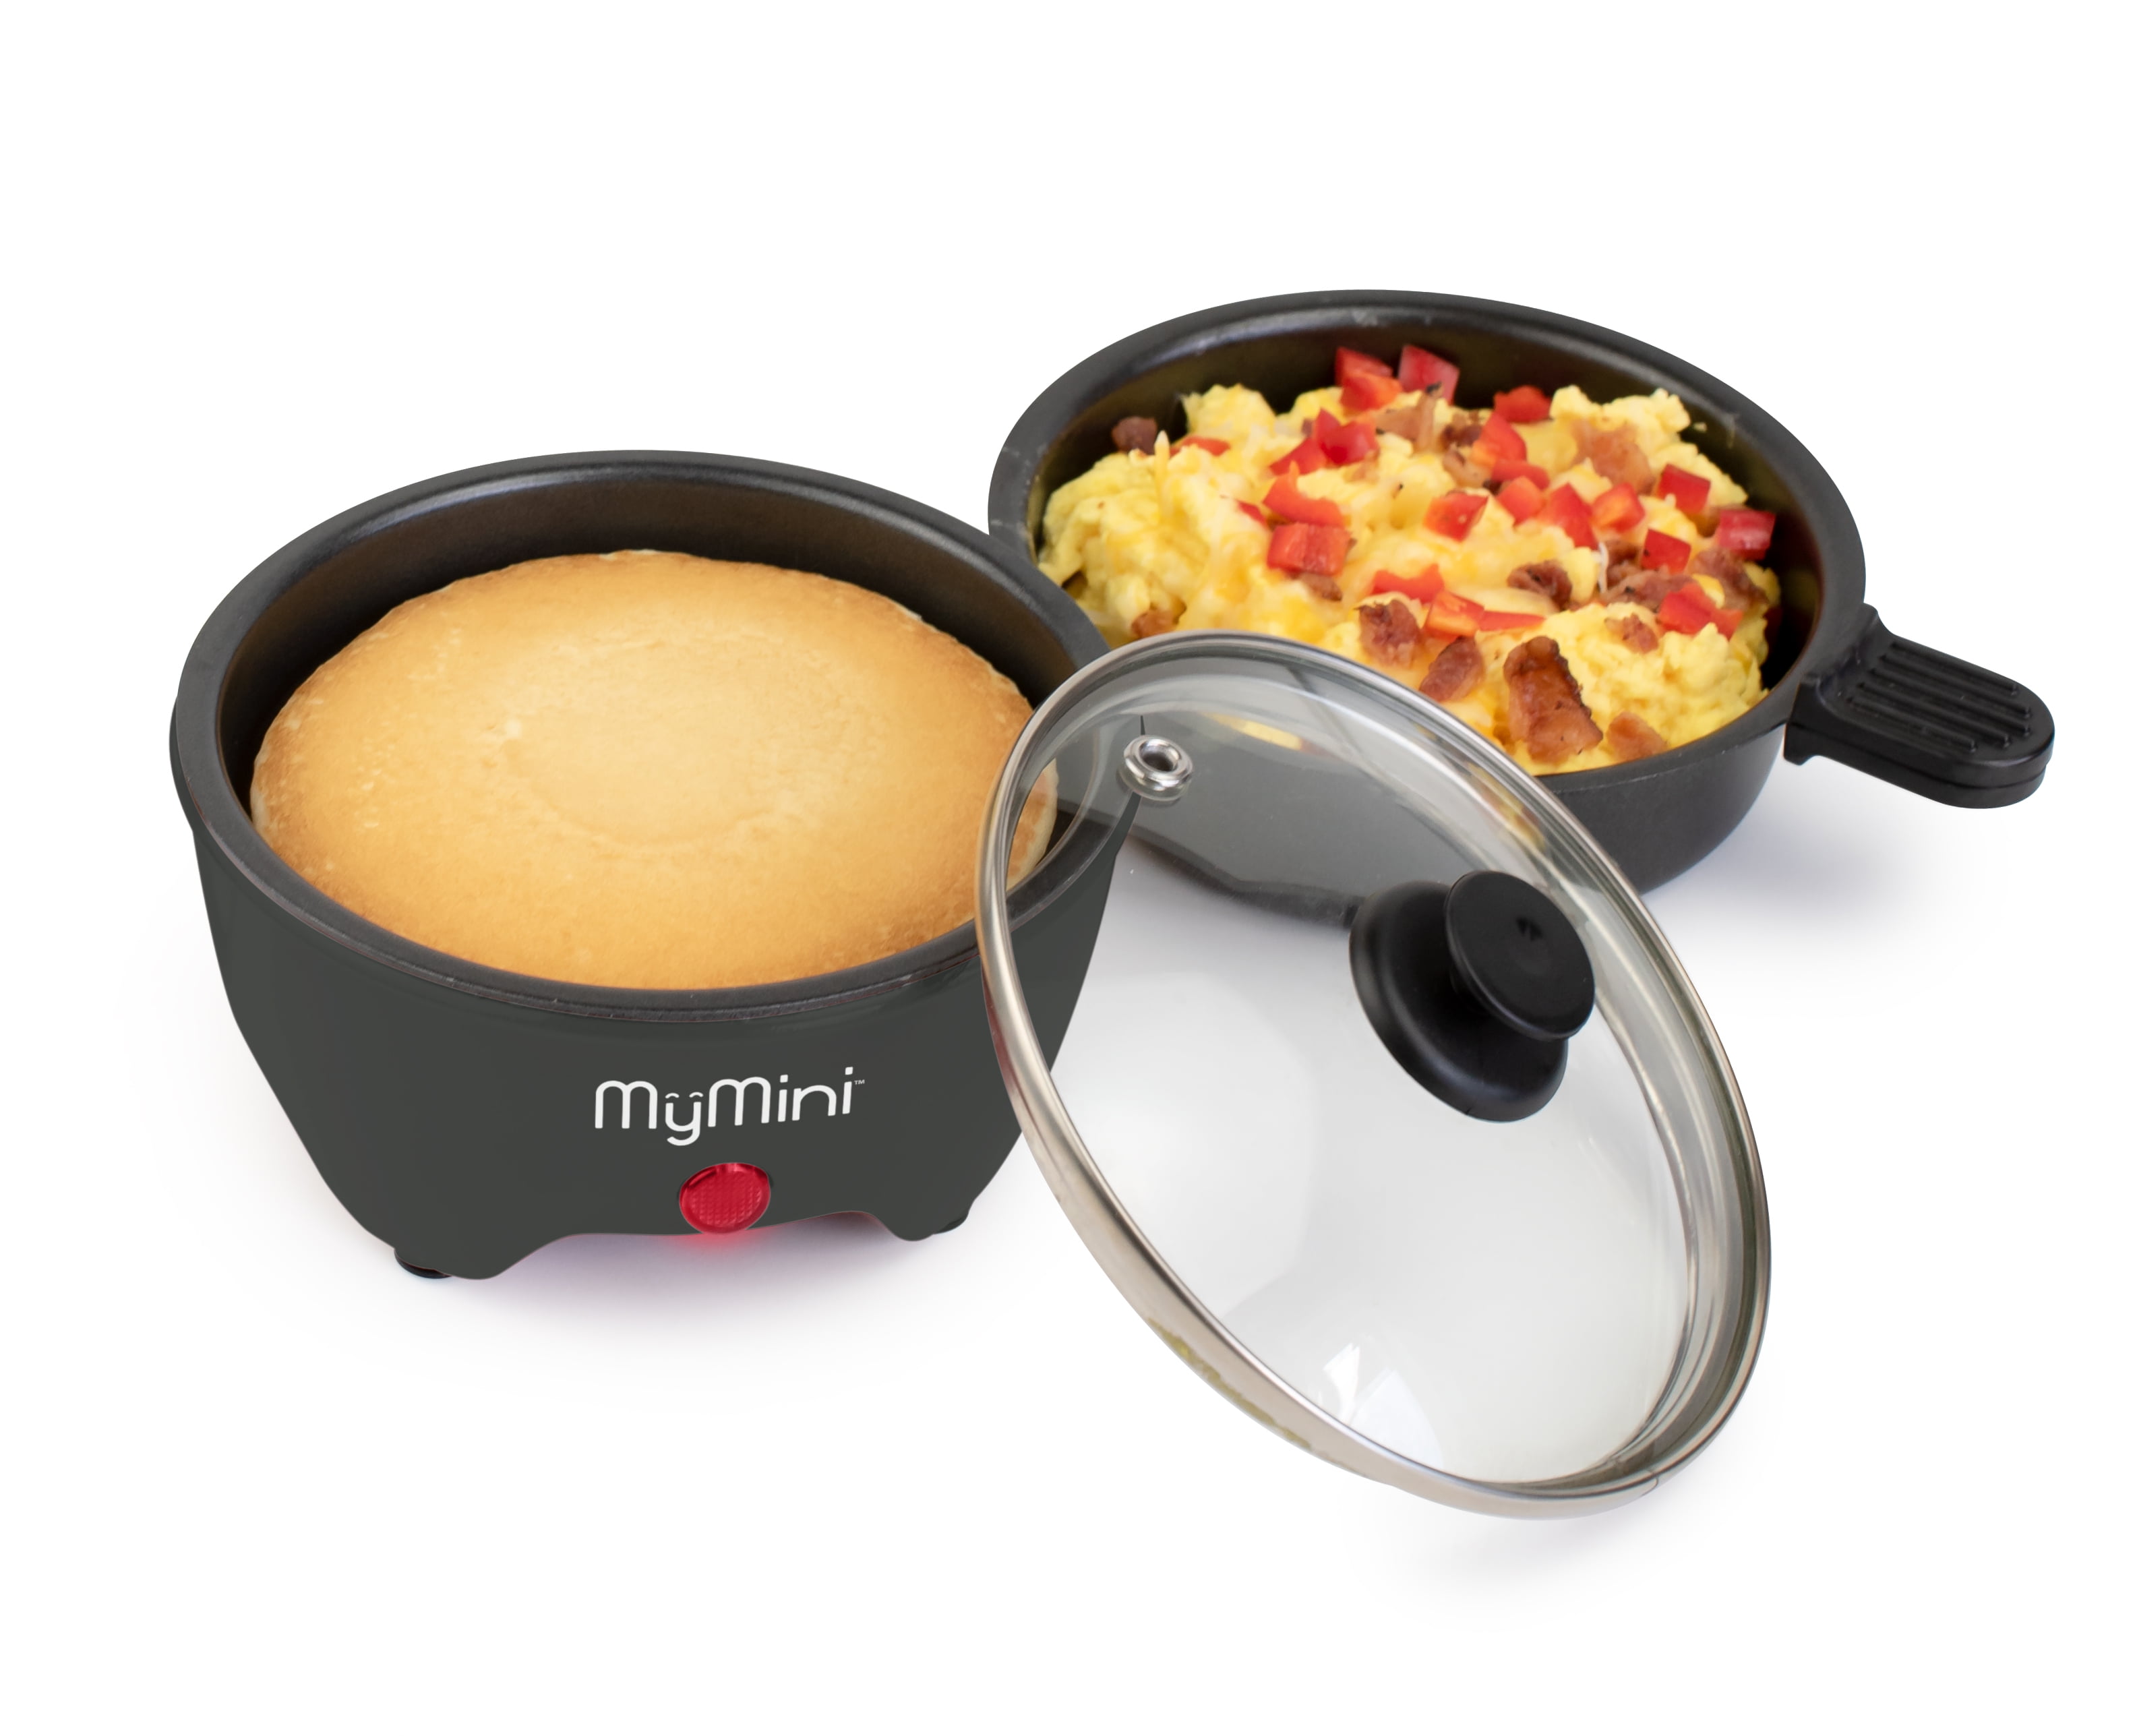 My mini noodle cooker and skillet sold at walmart it is awesome